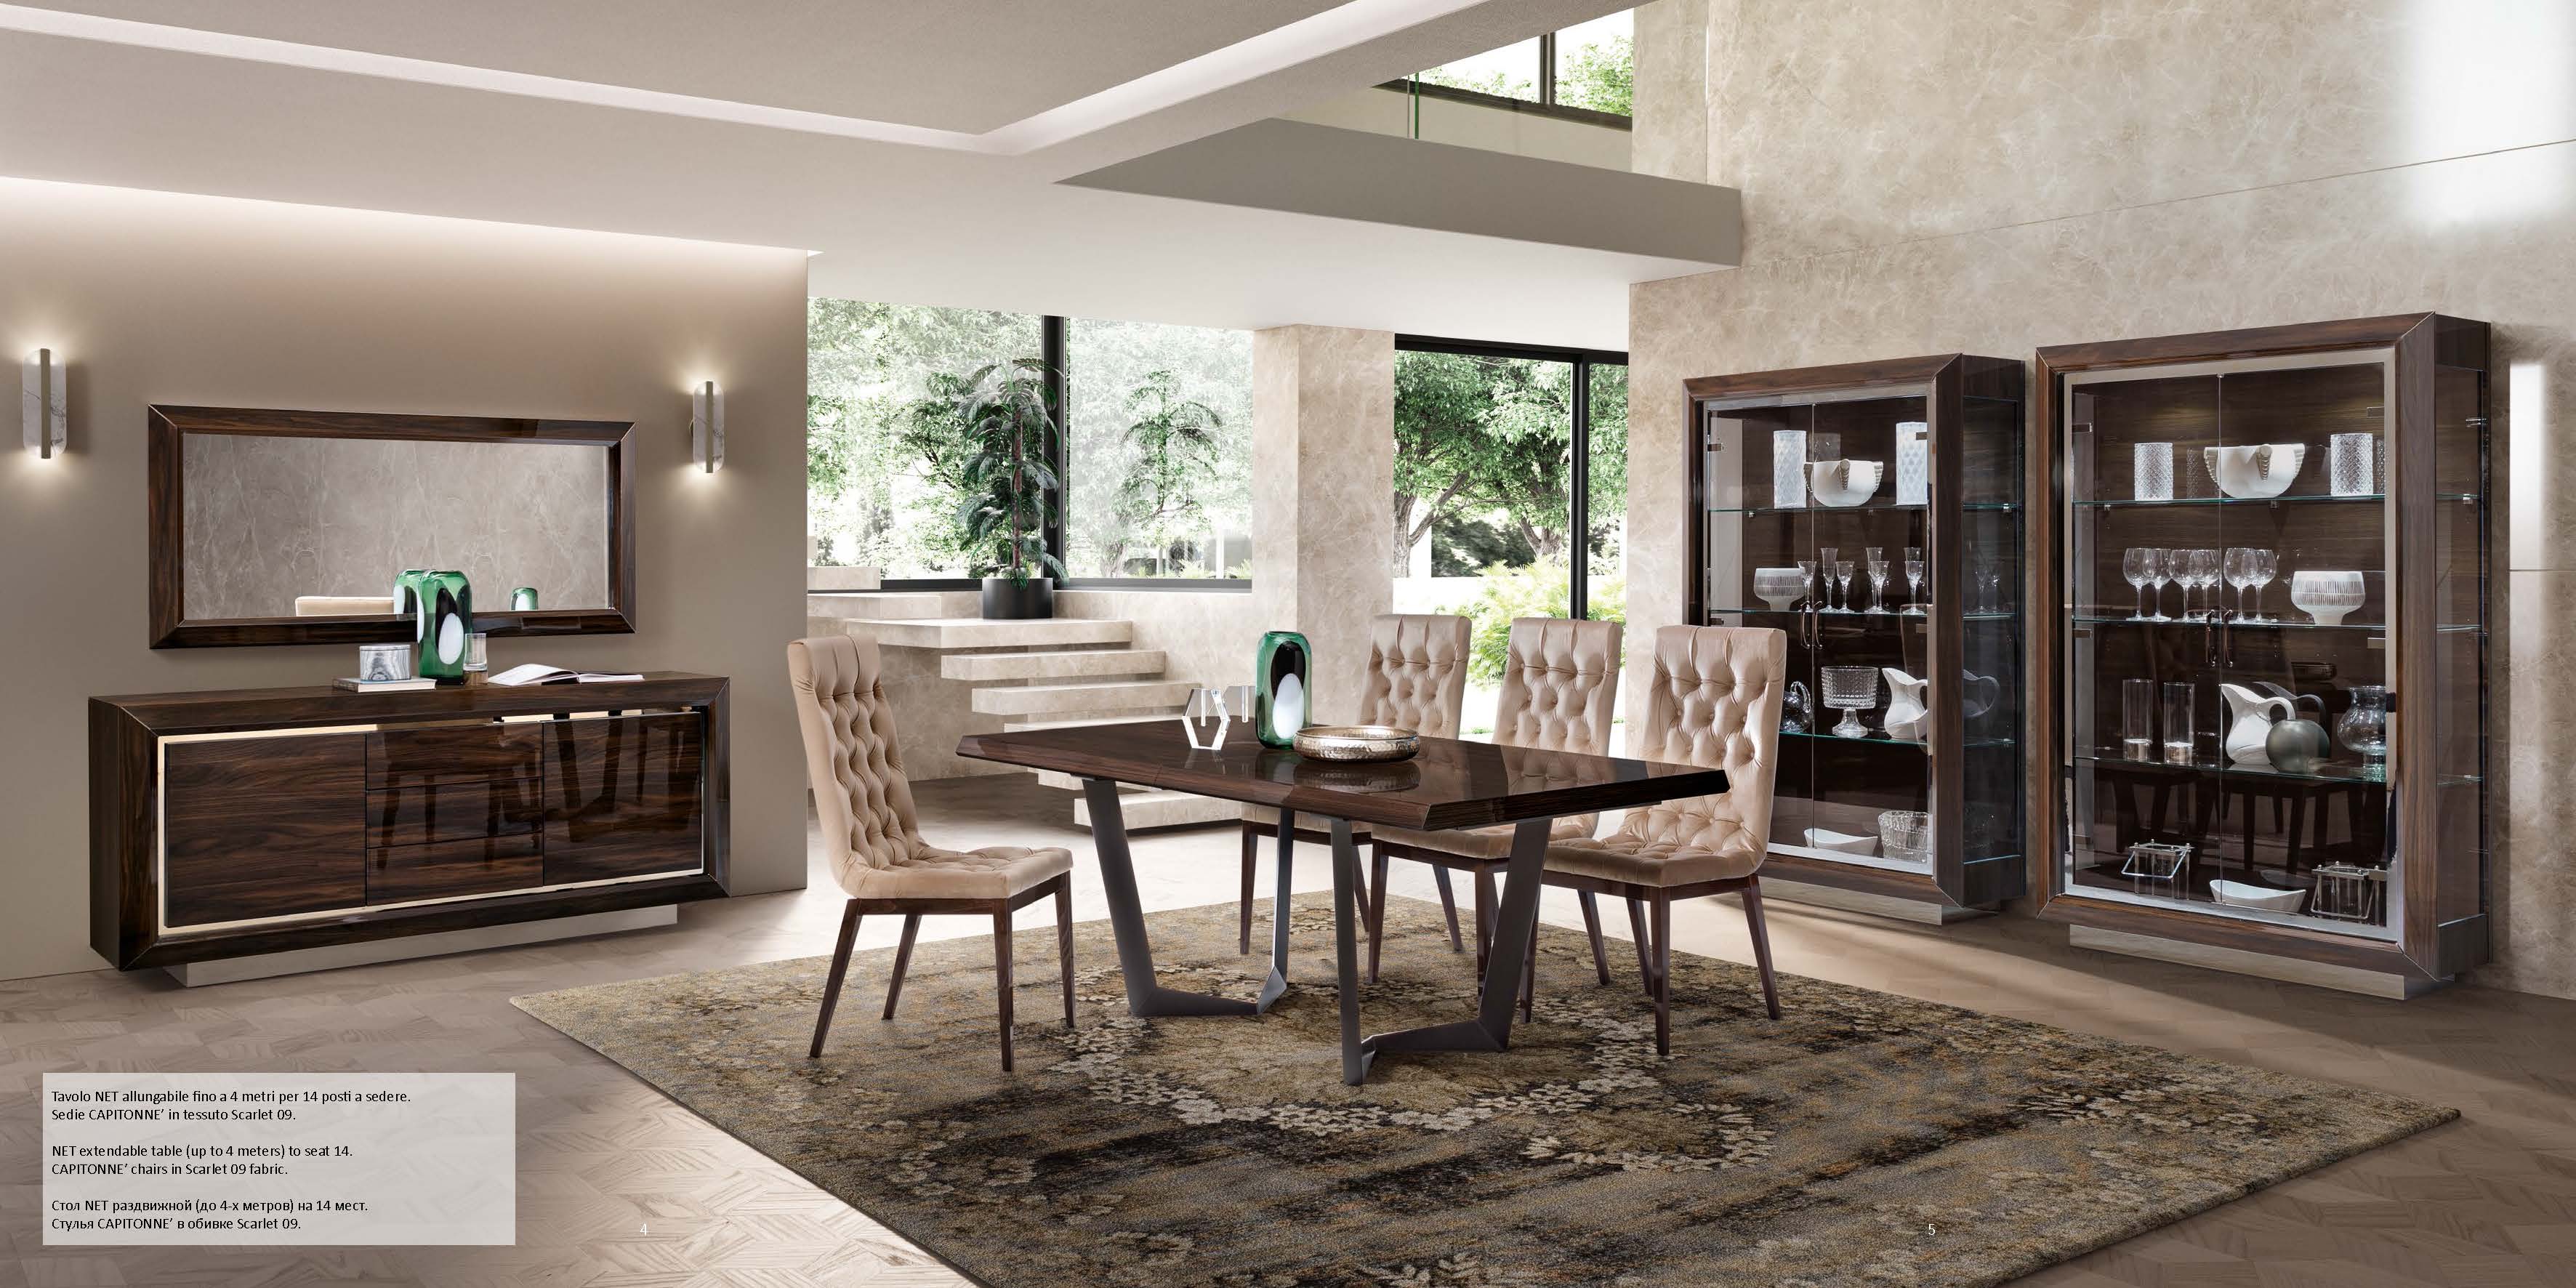 Dining Room Furniture Marble-Look Tables Elite Day Walnut Dining Additional items